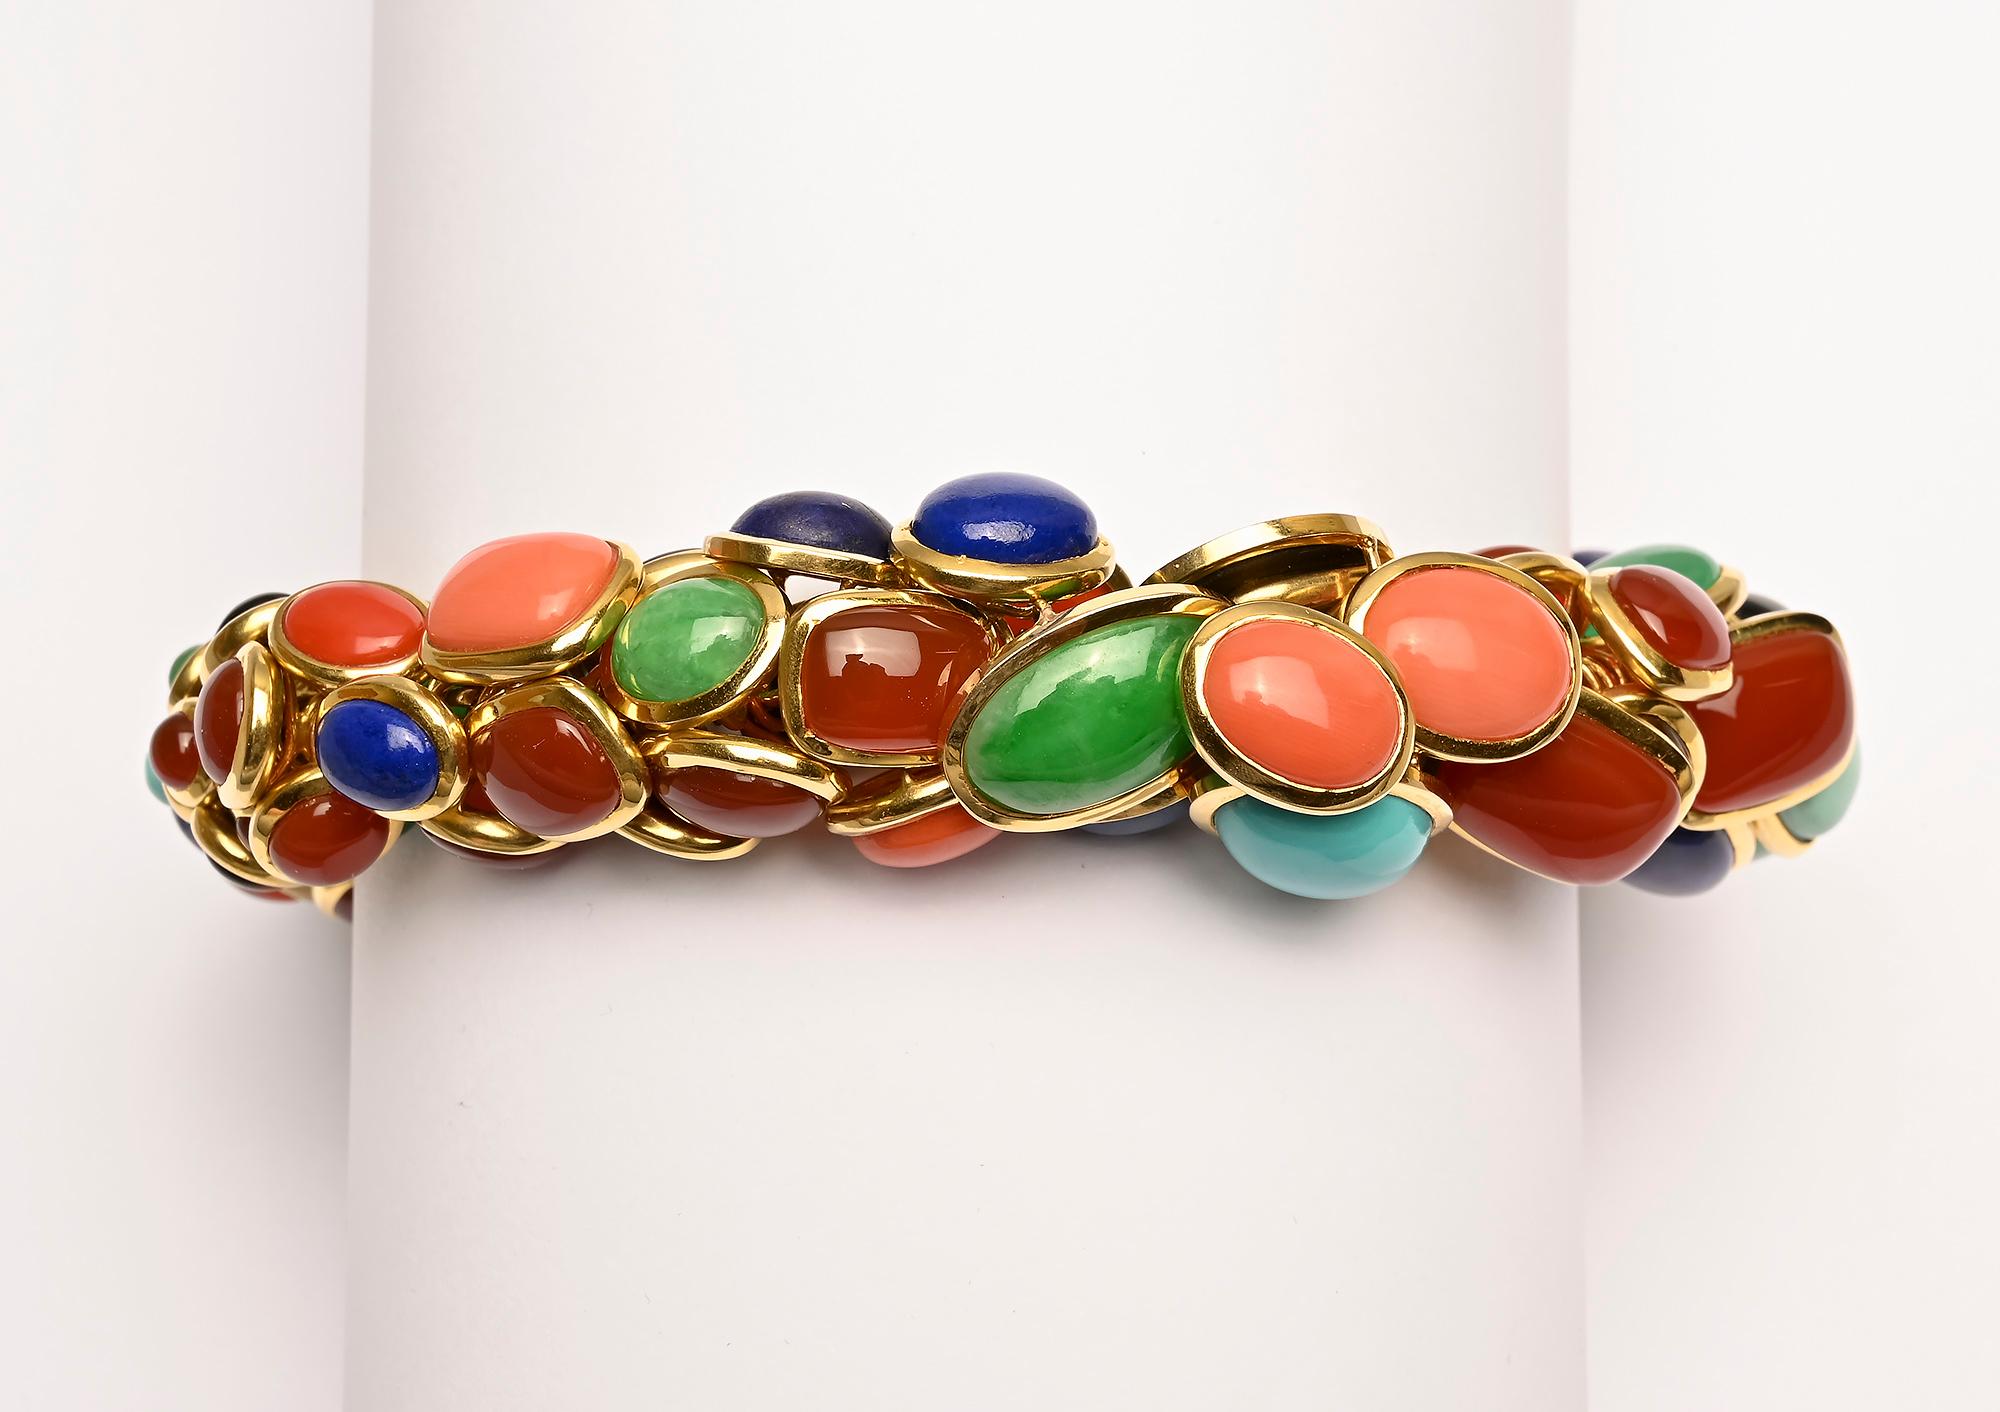 Stunning and most unusual multistone bracelet by Seaman Schepps. Lapiz lazuli; coral; cat's eye; jade; onyx and carnelian are set in round, oval and rectangular bezels creating a rounded form. When closed, the inner  diameter is 2 1/2 inches. The